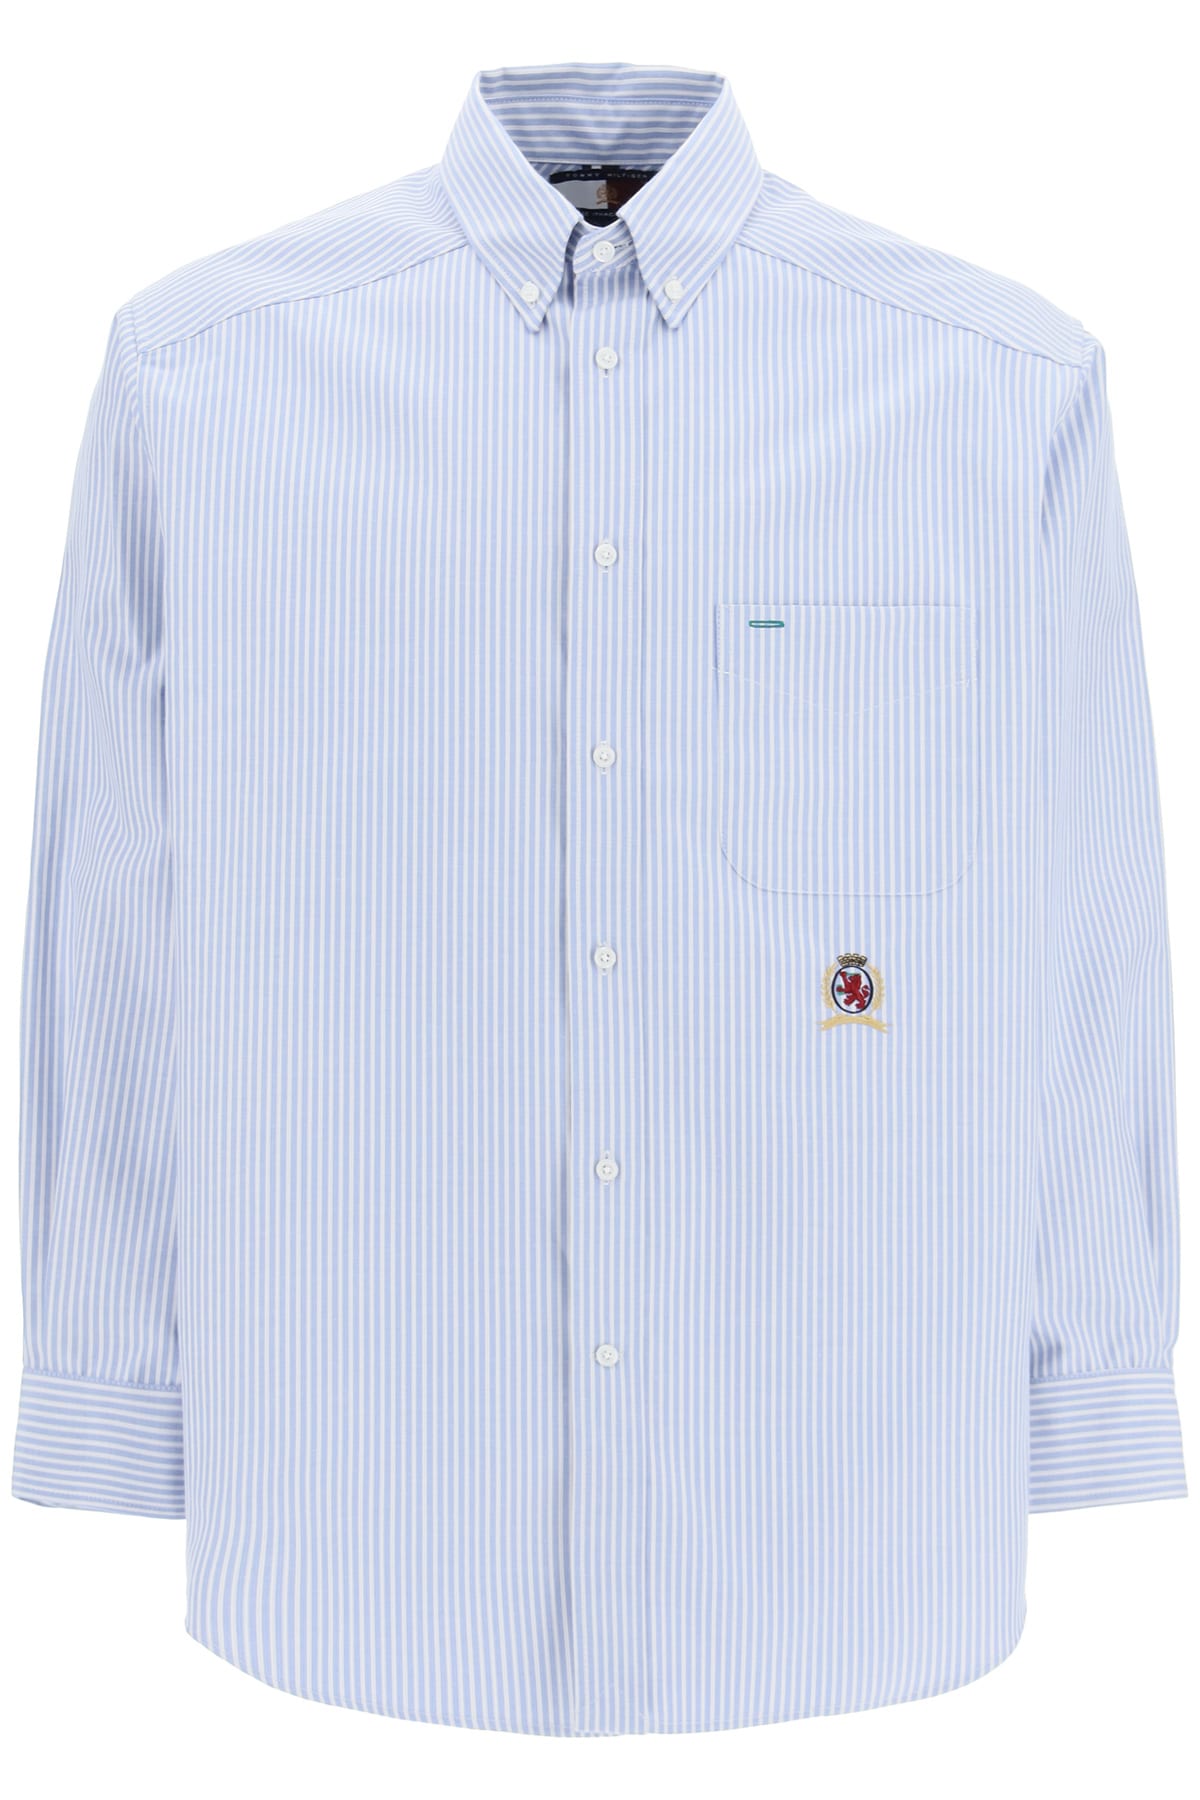 Tommy Hilfiger Ithaca Striped Shirt